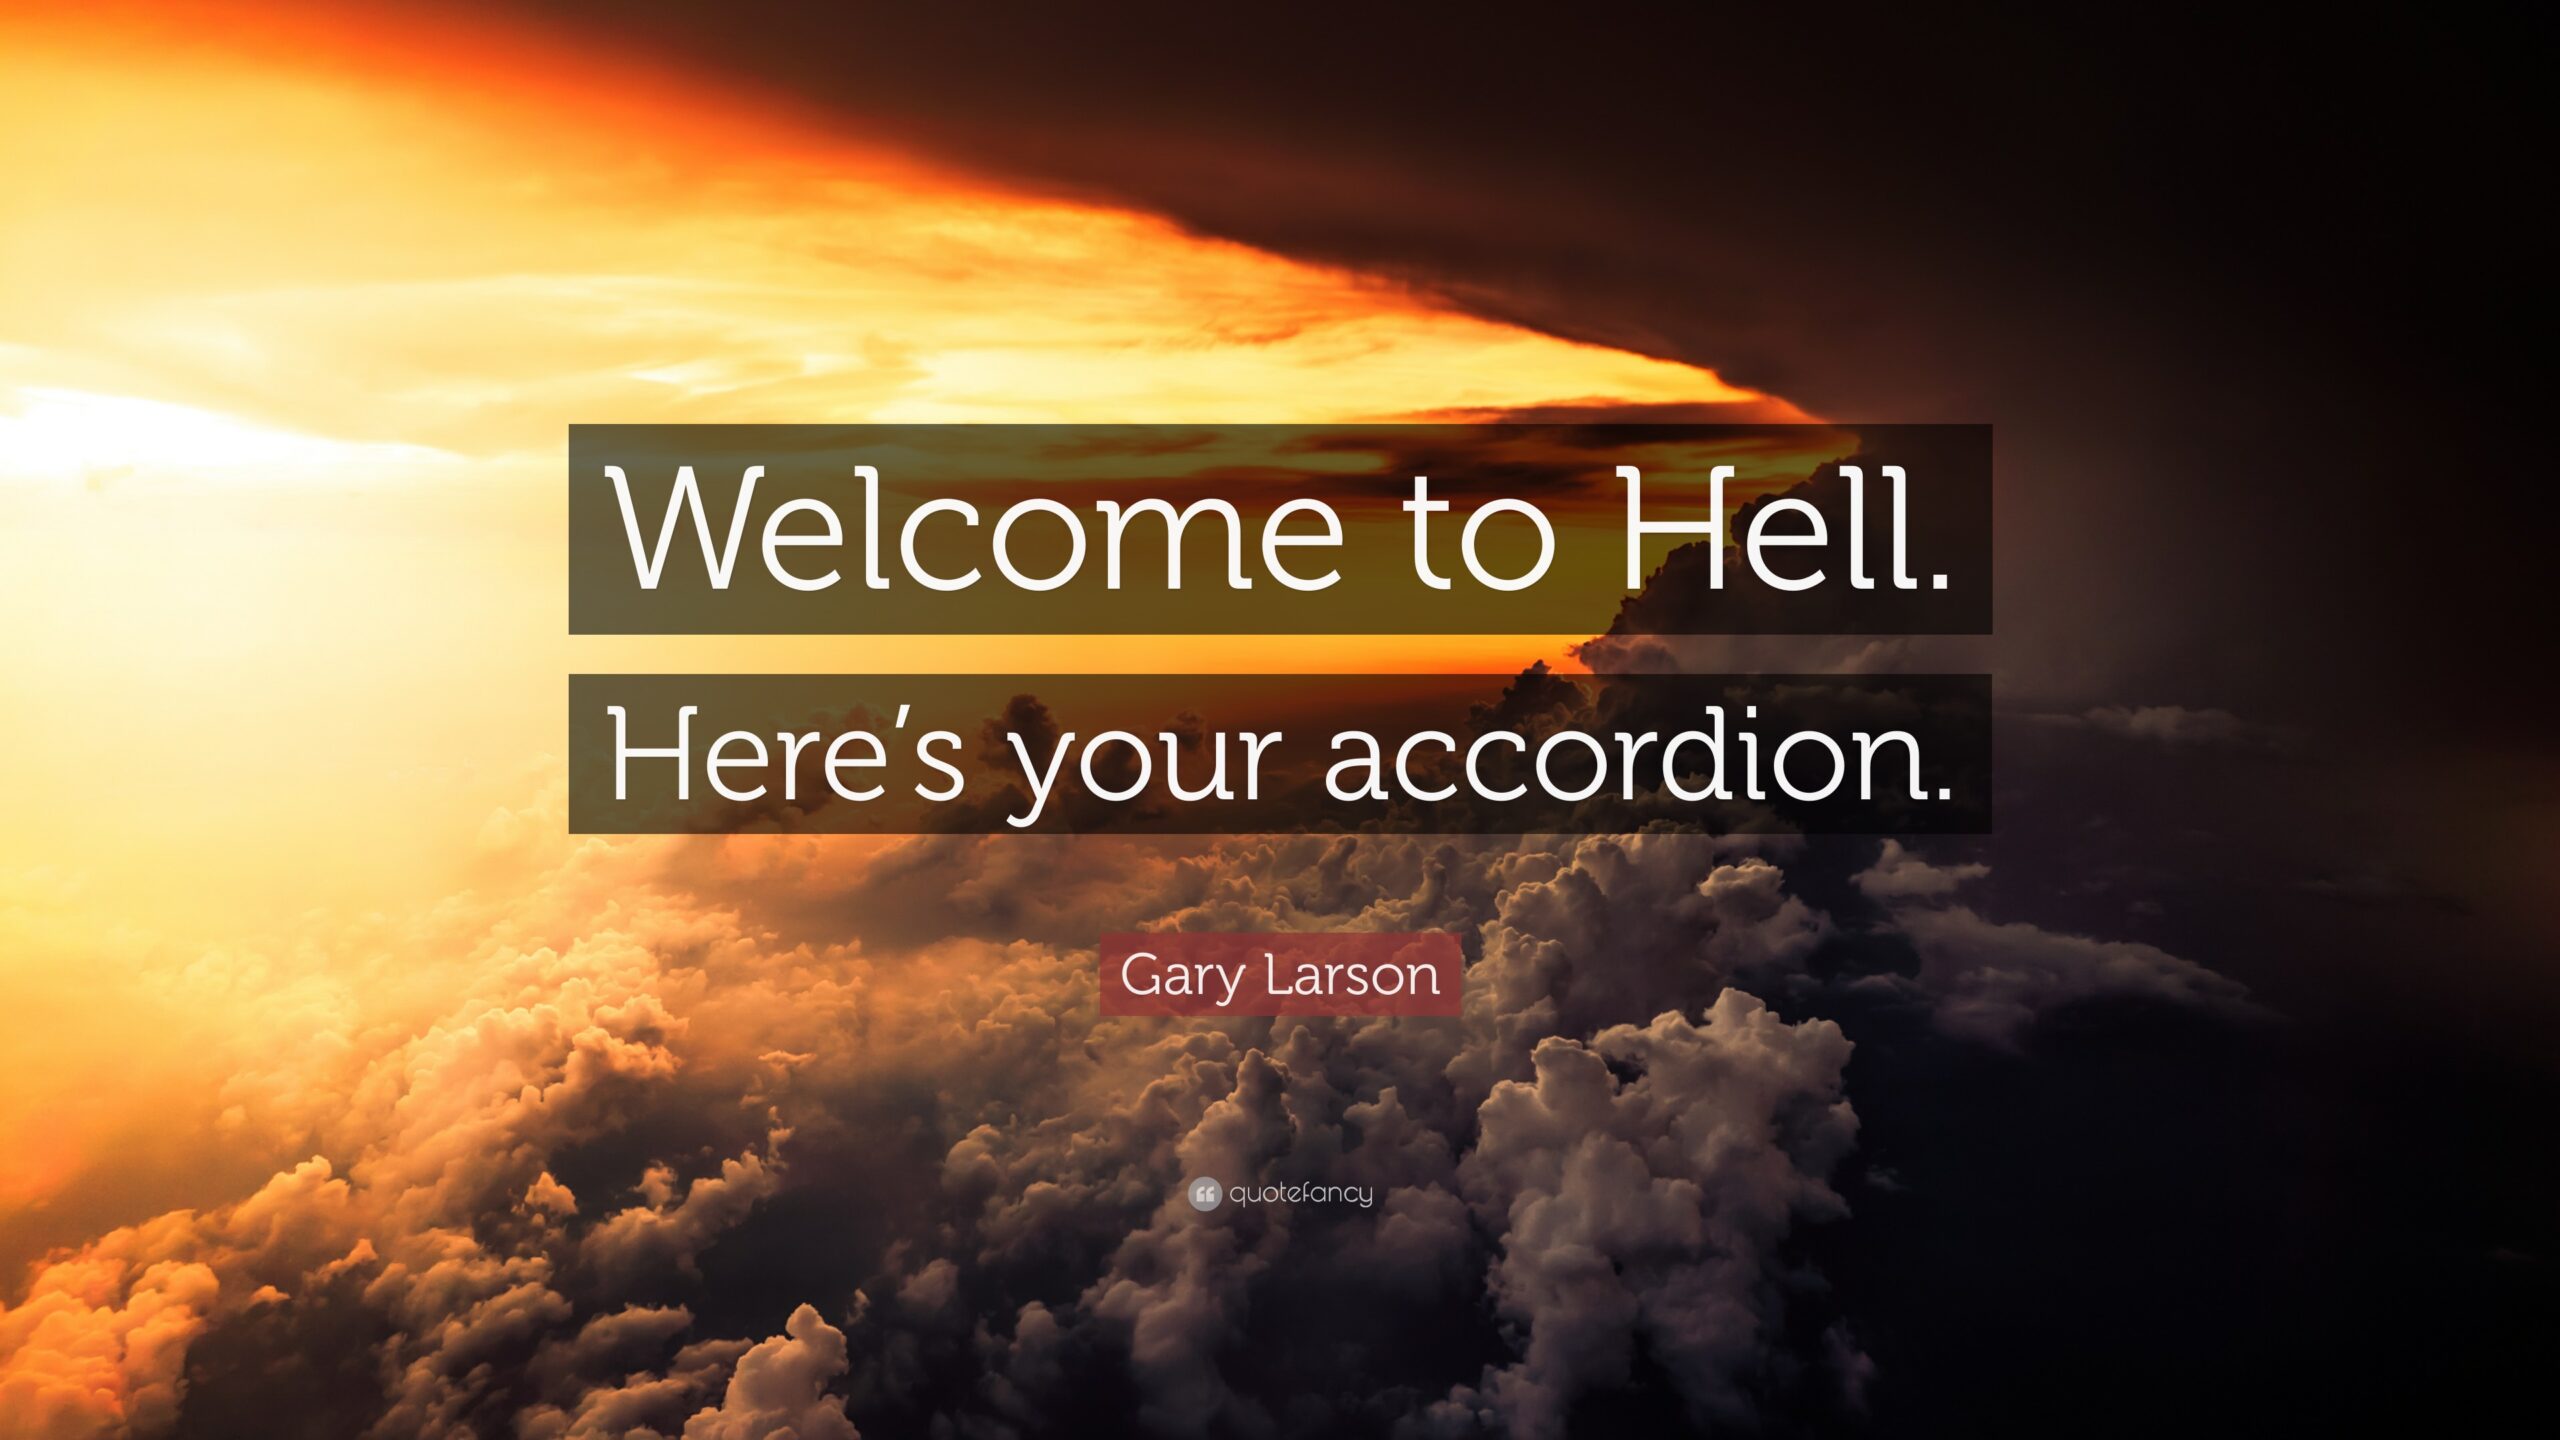 Gary Larson Quote “Welcome to Hell Here’s your accordion”